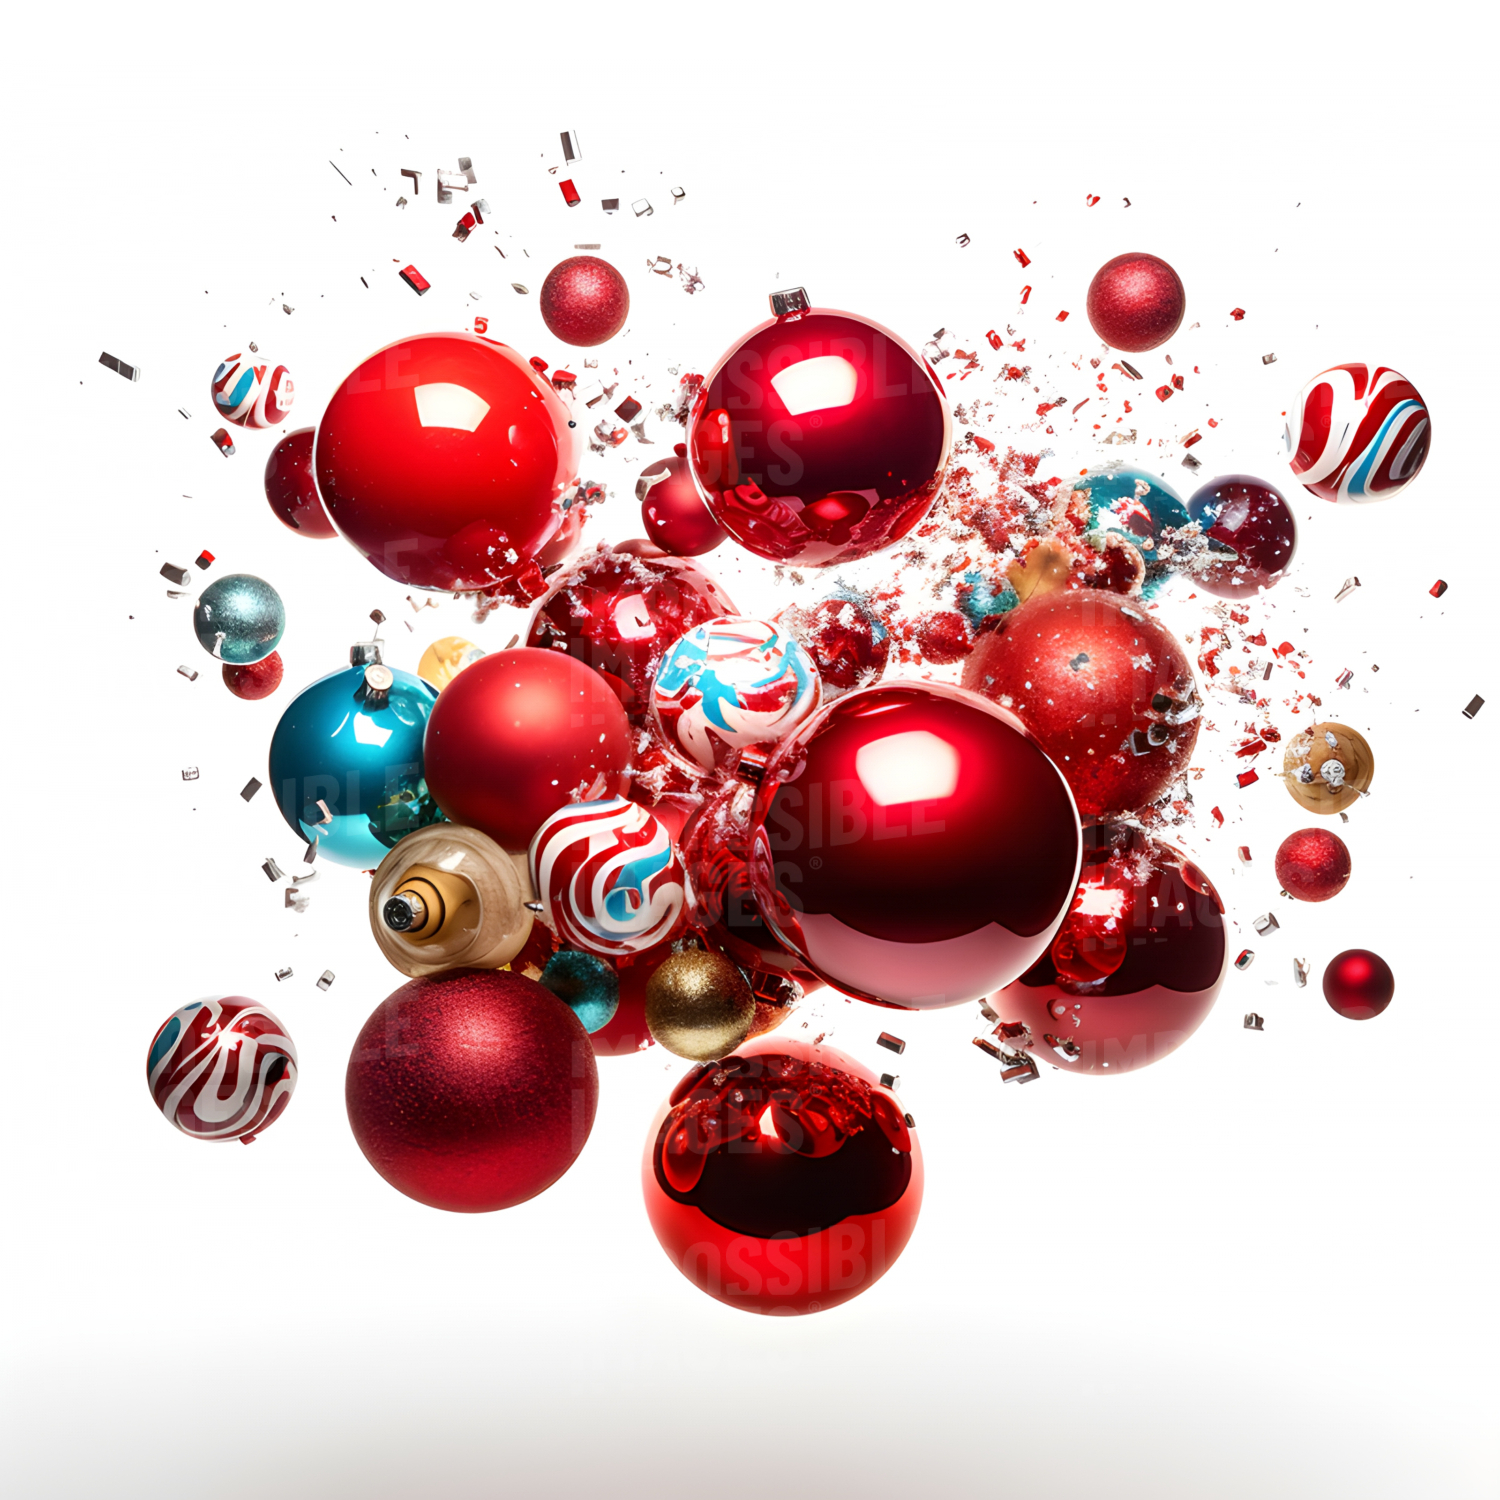 Bauble explosion